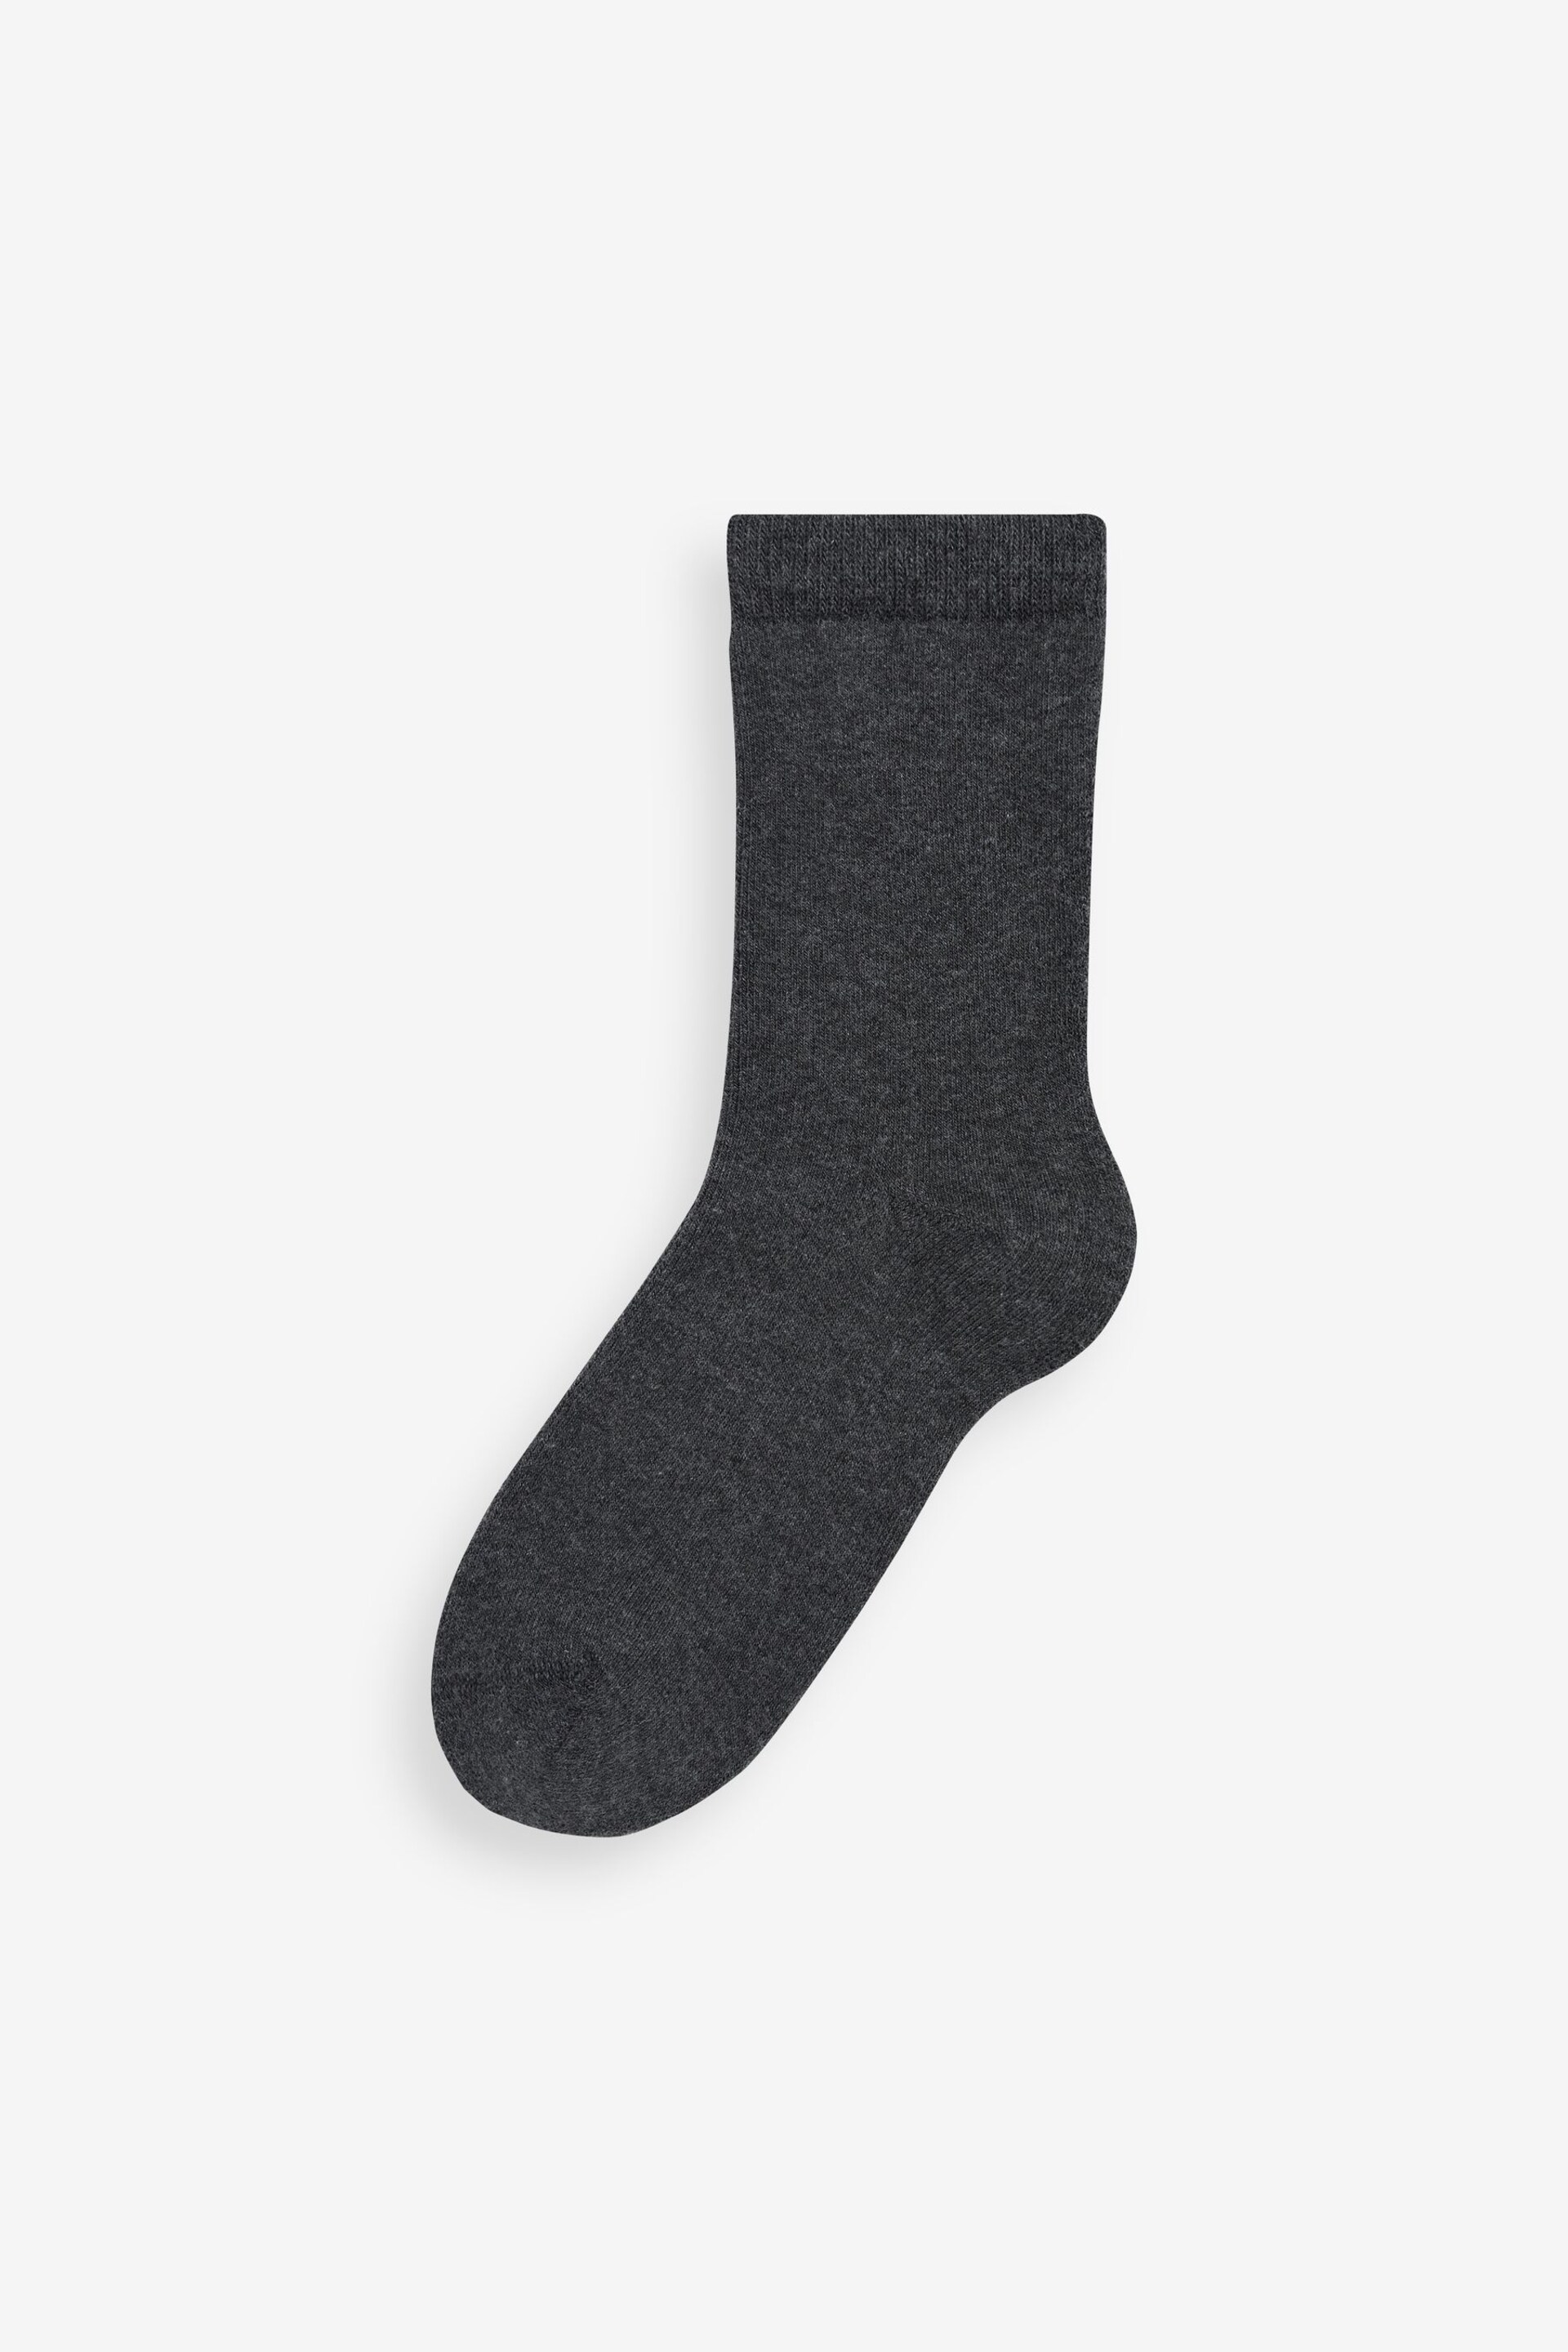 Grey Warm Thermal Cotton Rich Socks 5 Pack - Image 2 of 2